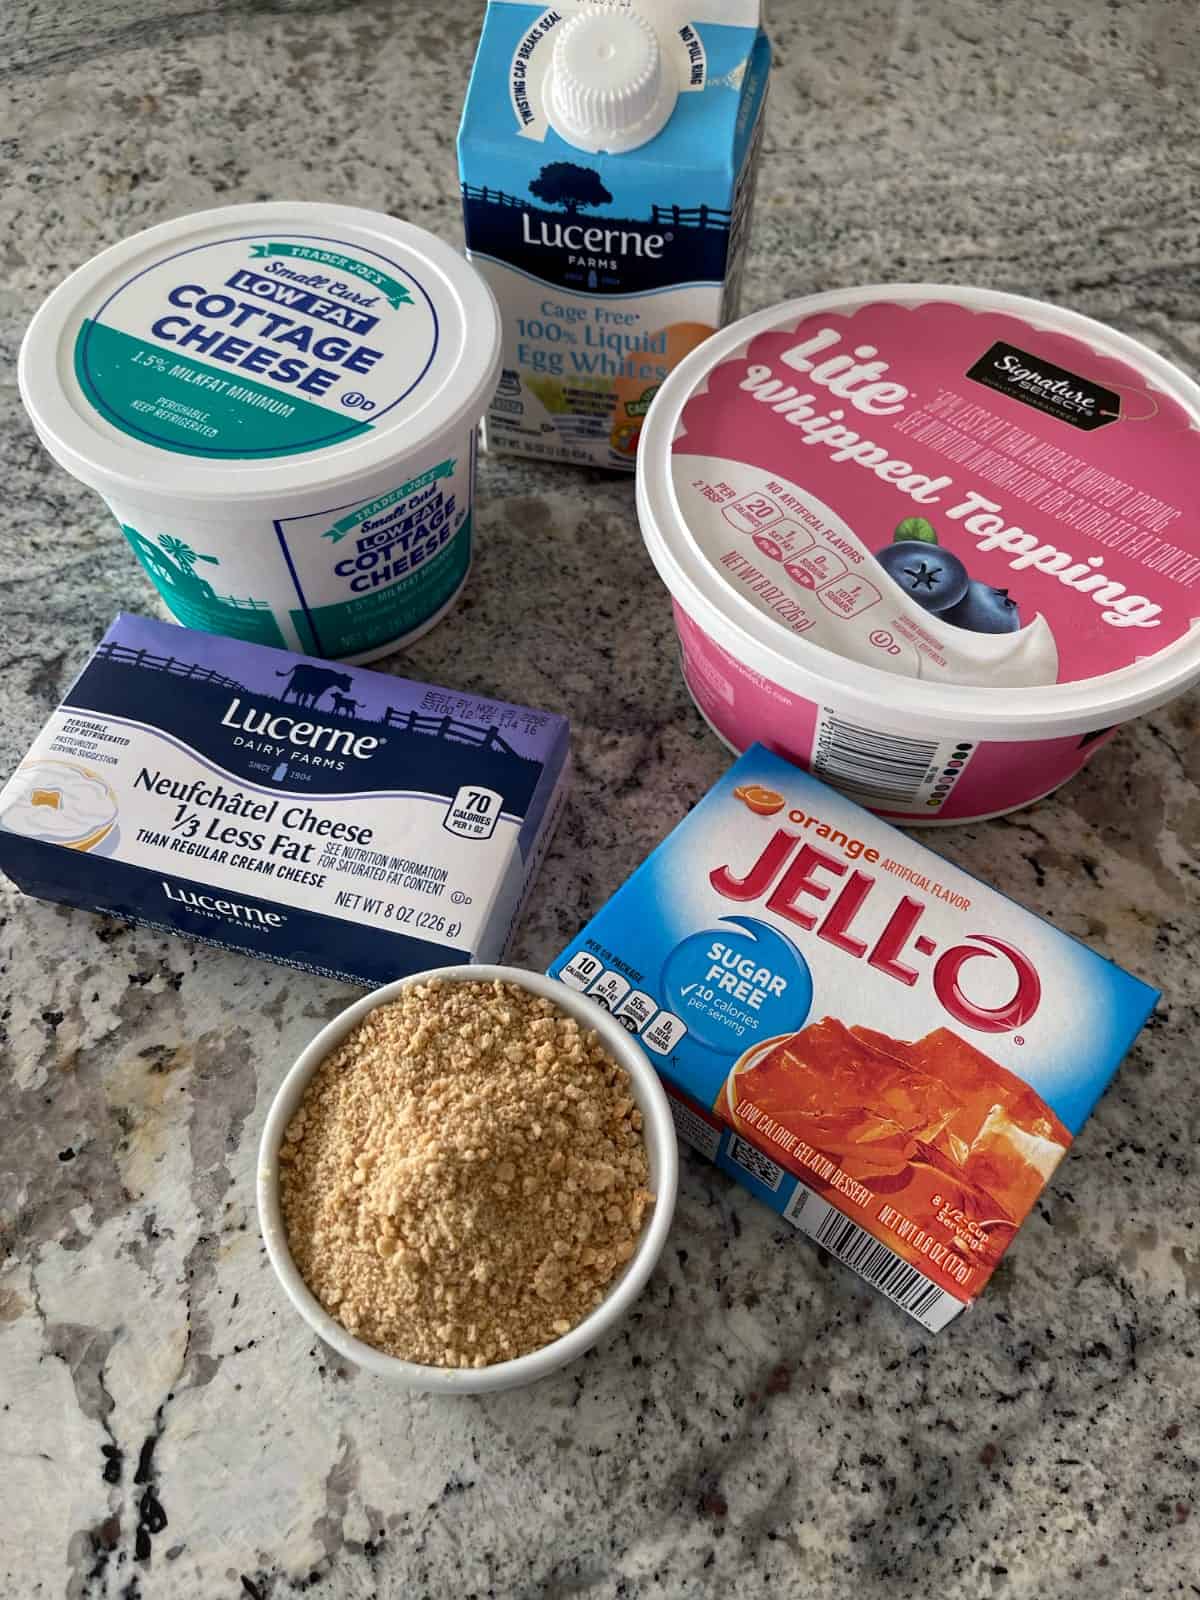 Ingredients including graham cracker crumbs, orange Jello, light cream cheese, low fat cottage cheese, lite whipped topping and egg whites.